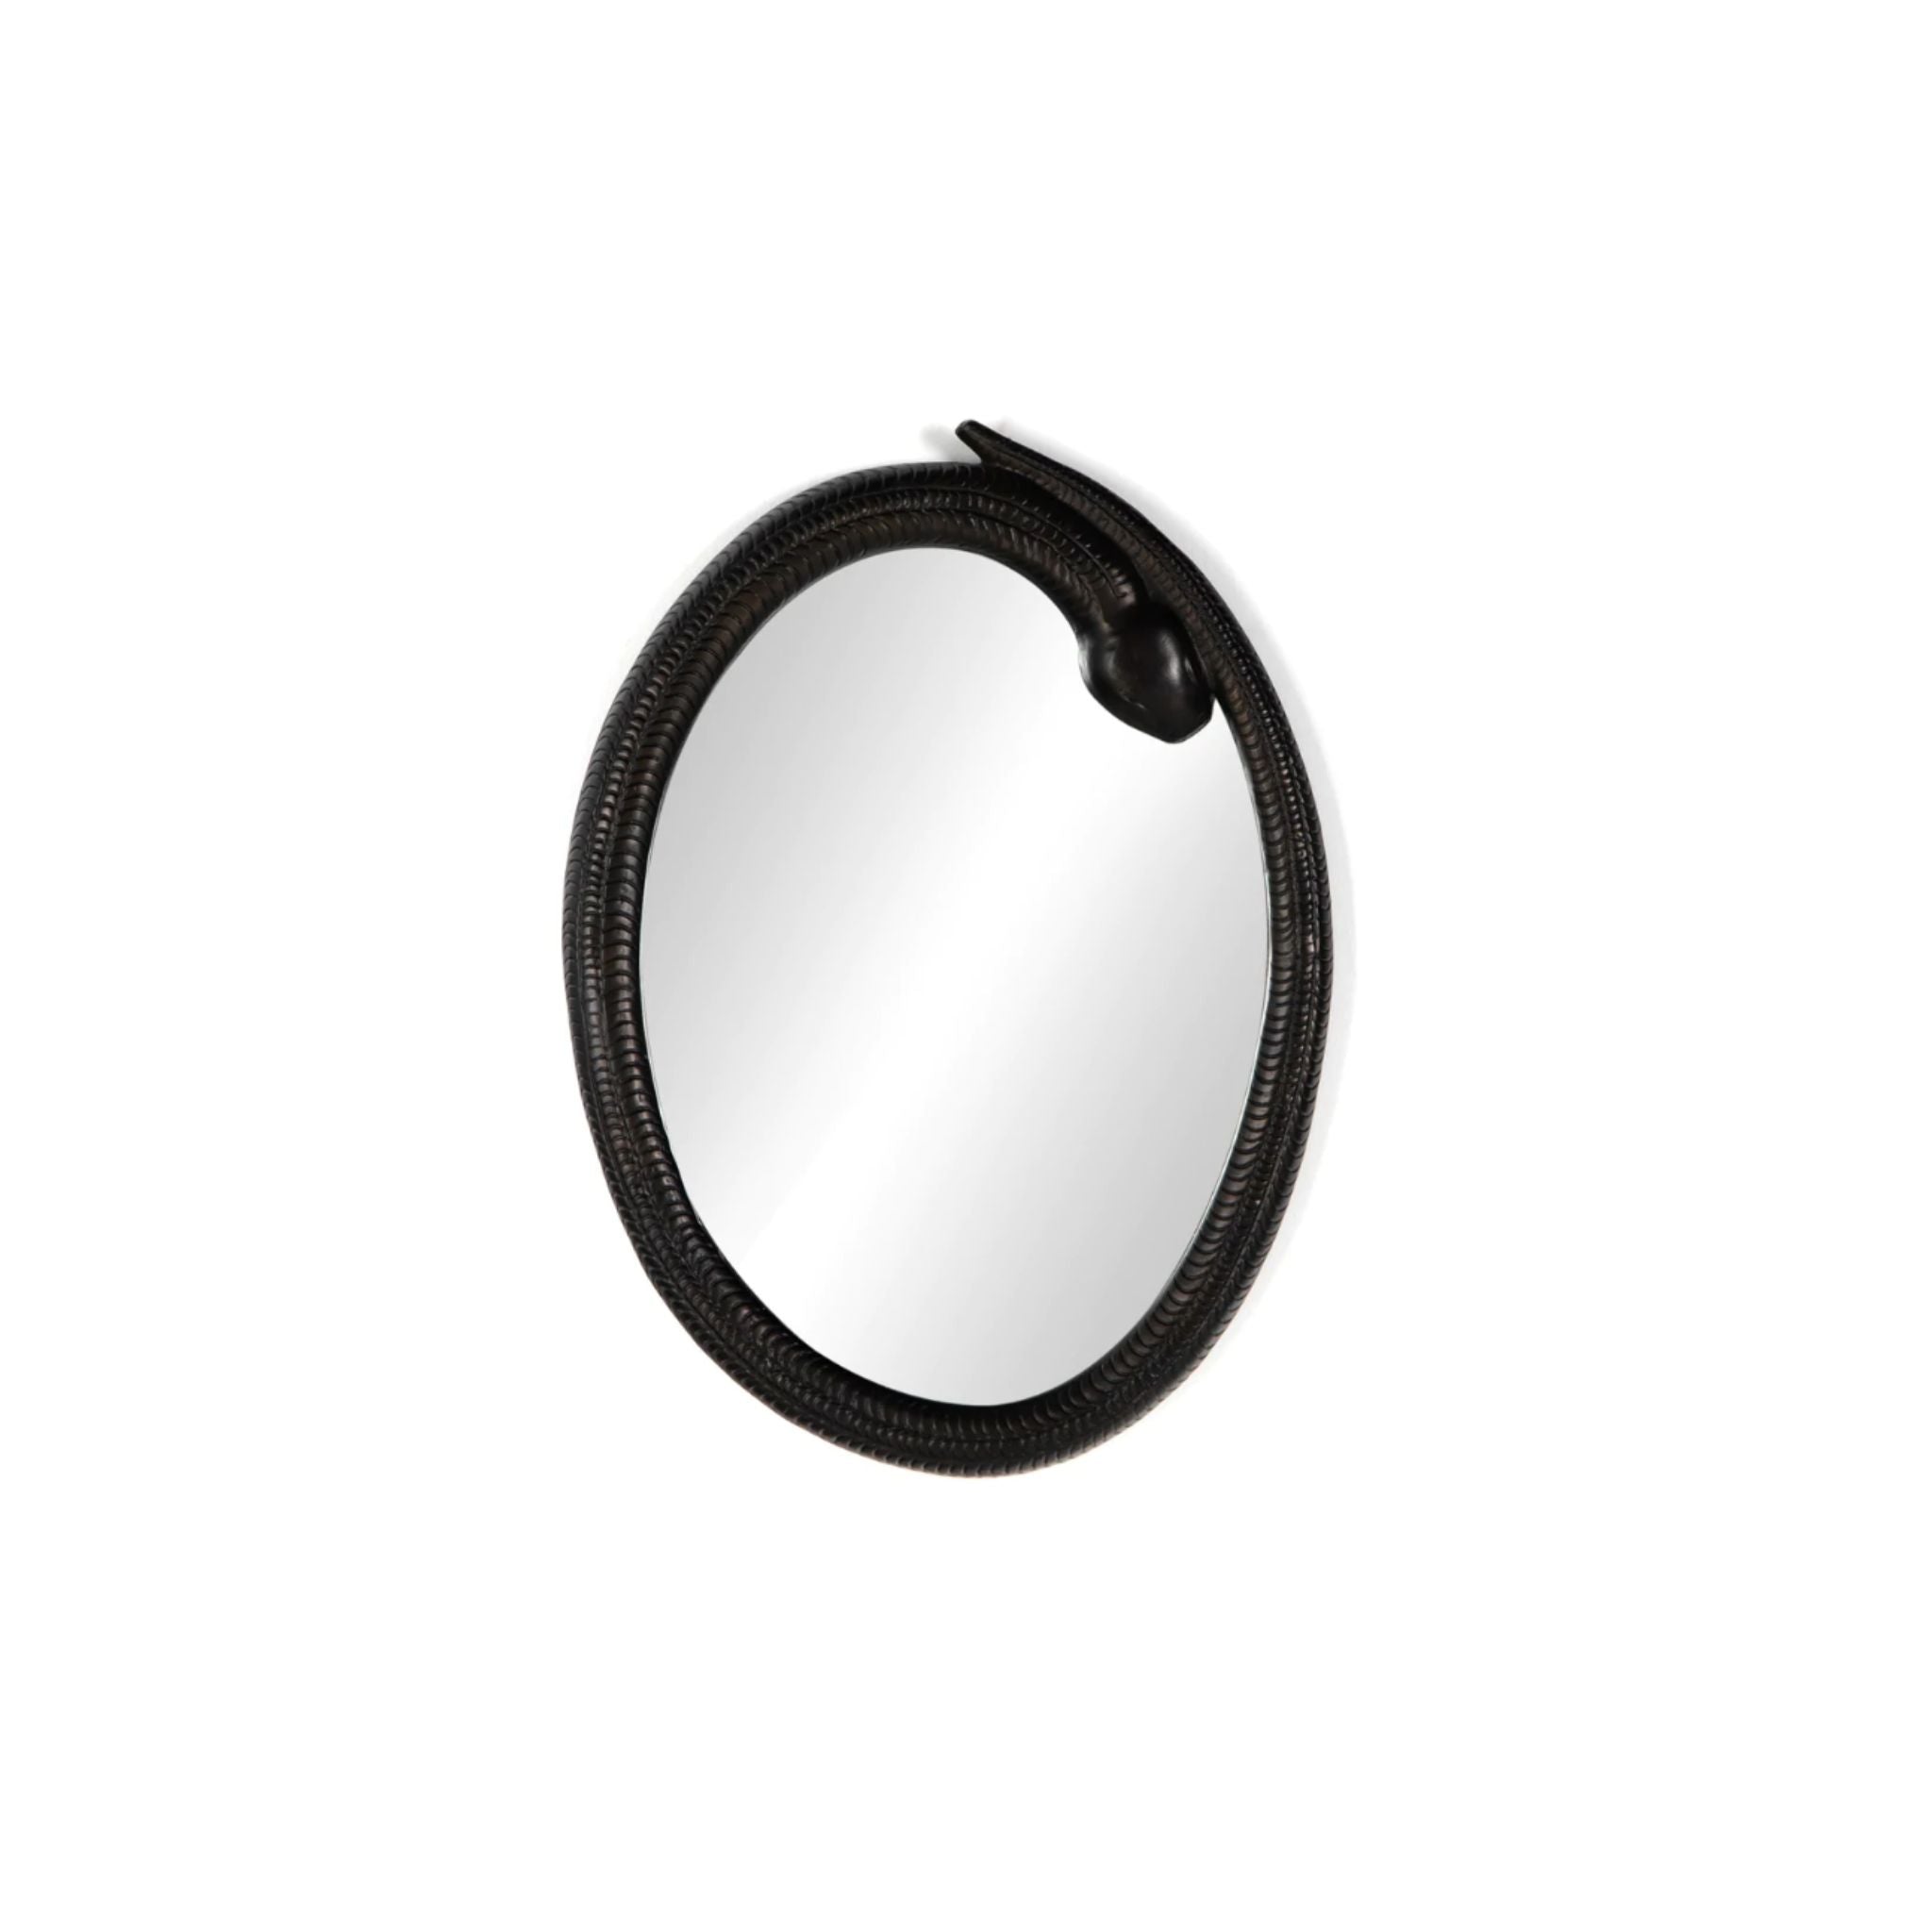 SERPENT MIRROR - BLACK - Simply Elevated Home Furnishings 